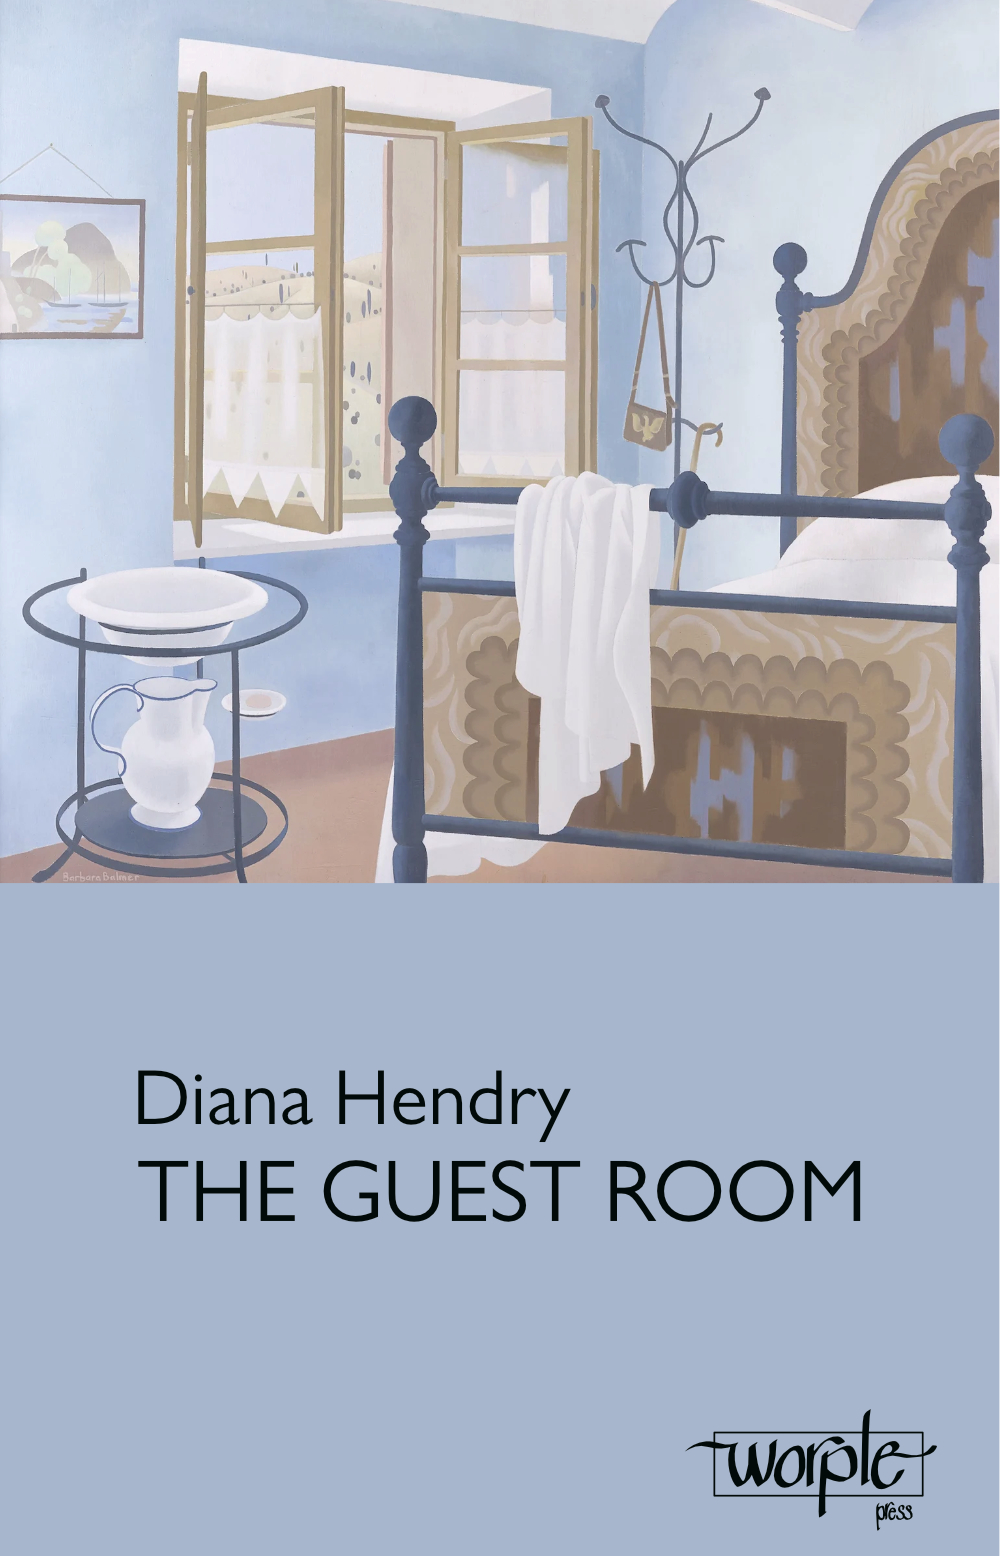 The Guest Room by Diana Hendry